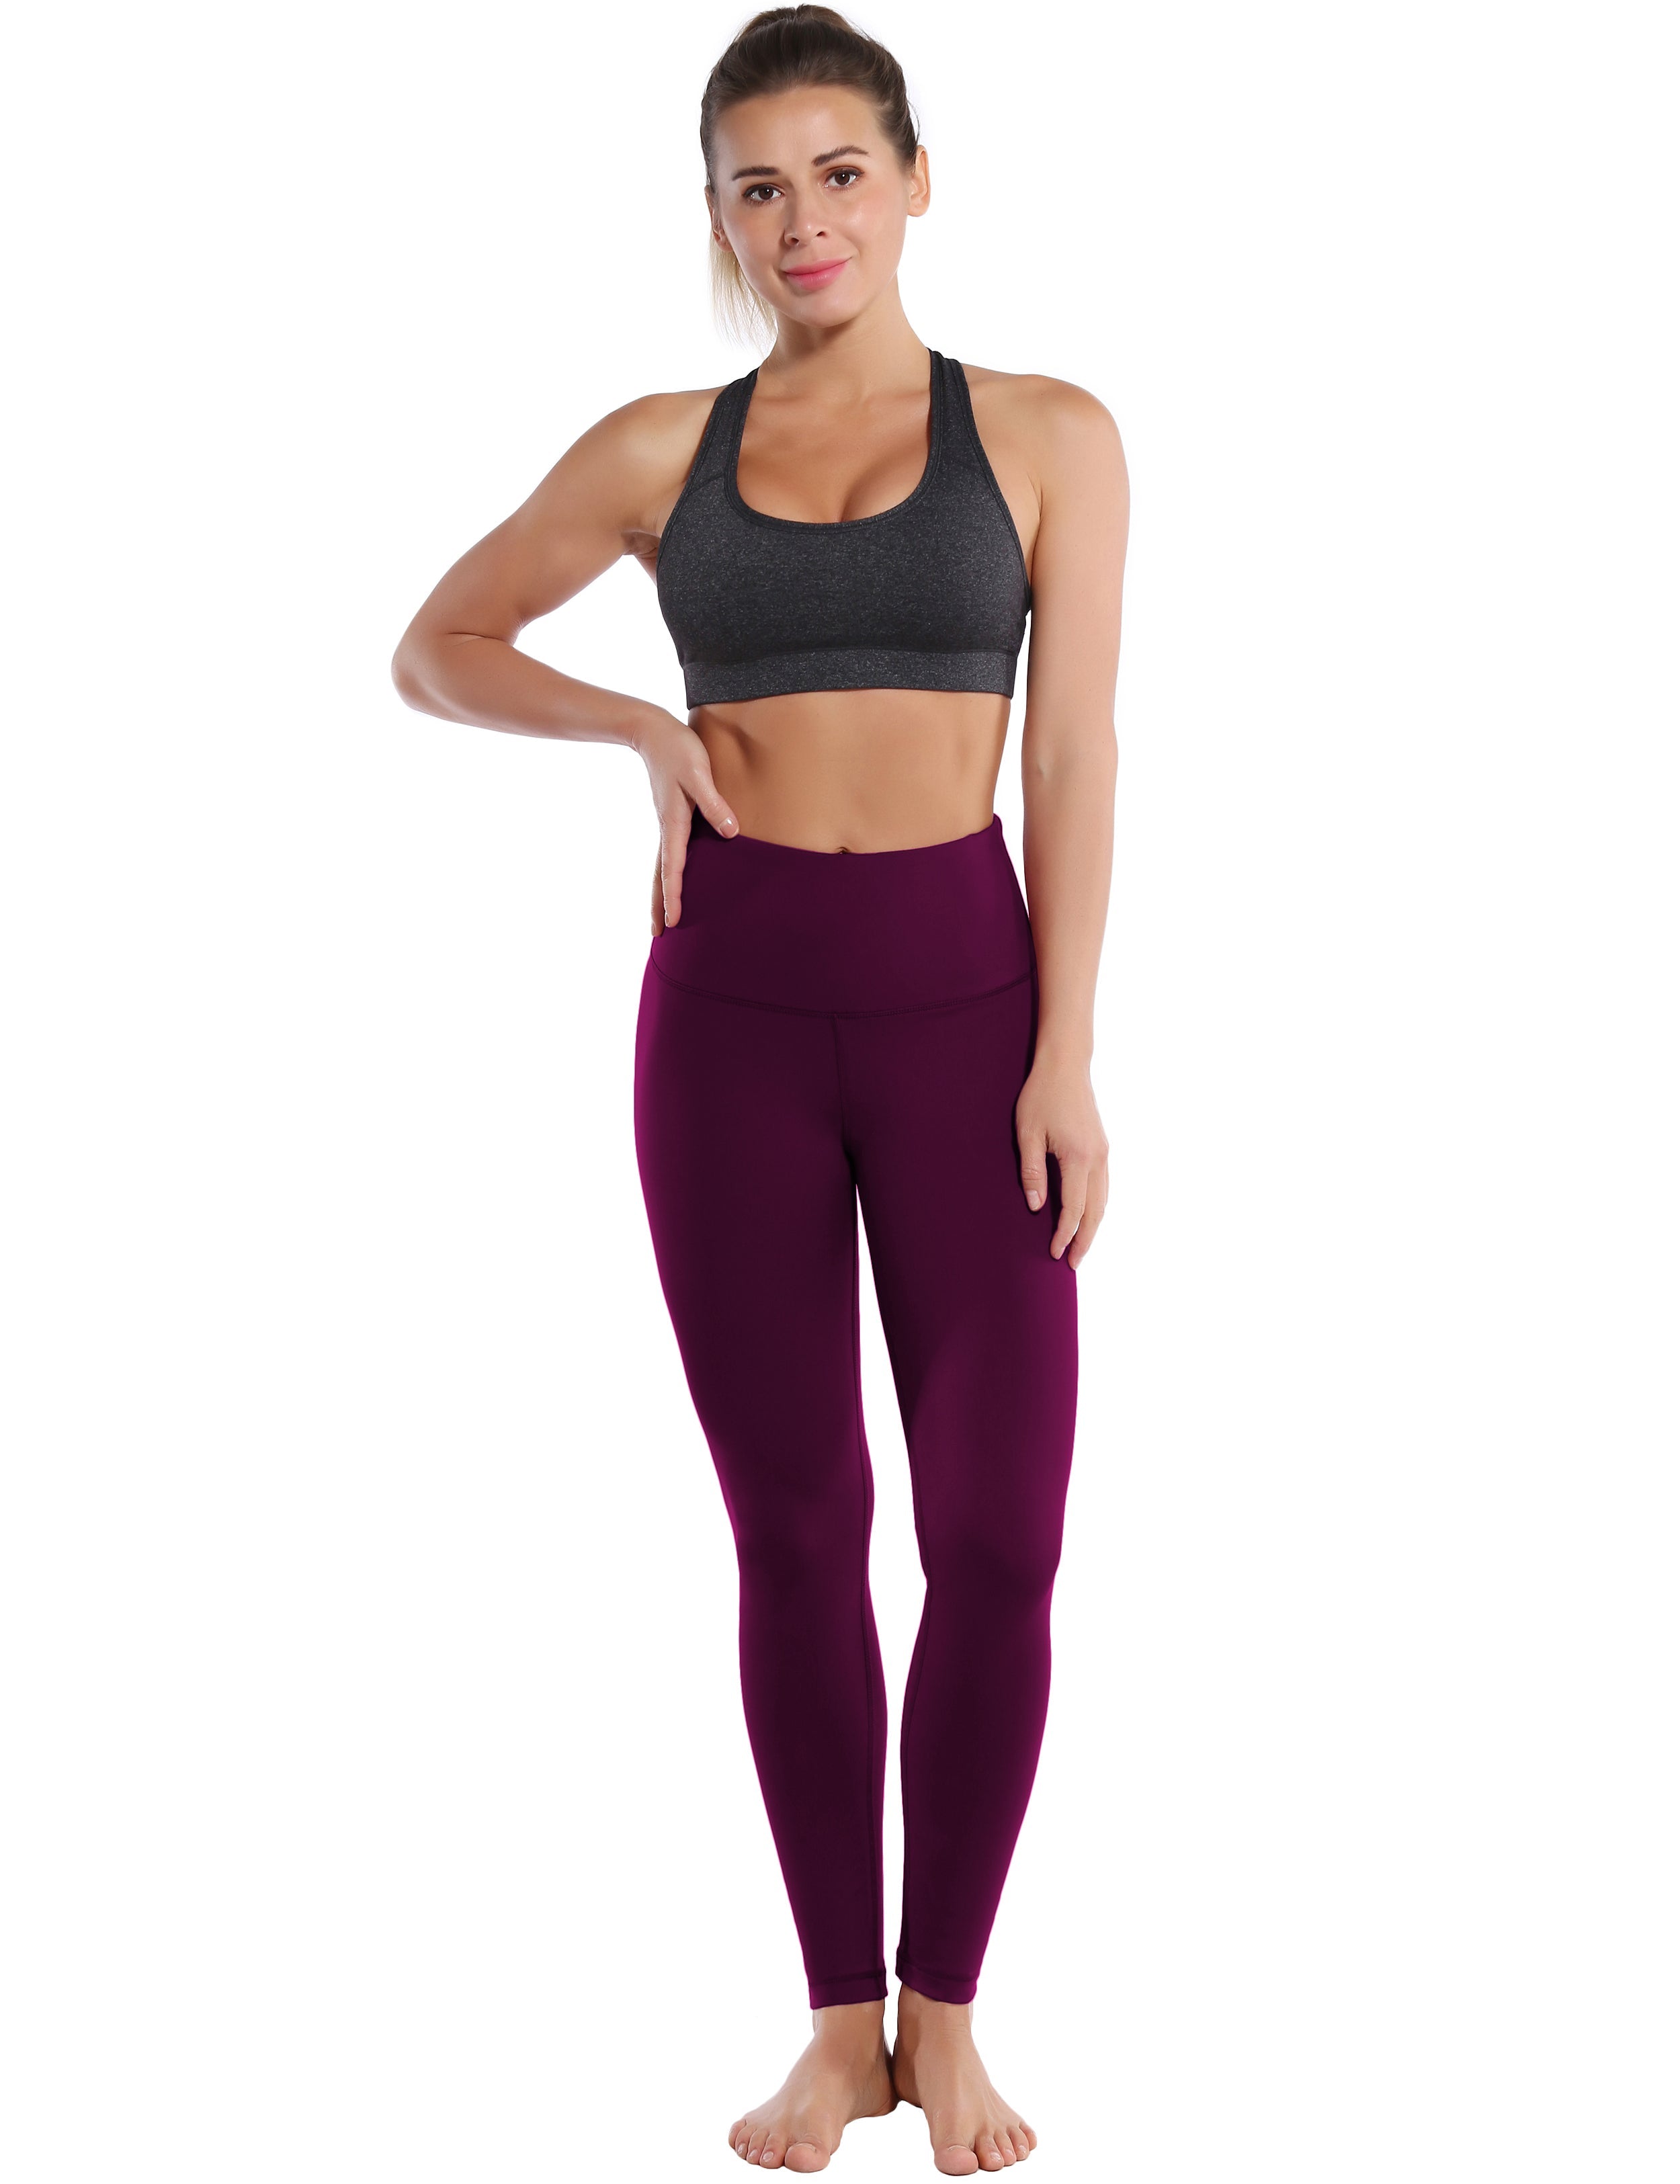 High Waist Yoga Pants grapevine 75%Nylon/25%Spandex Fabric doesn't attract lint easily 4-way stretch No see-through Moisture-wicking Tummy control Inner pocket Four lengths